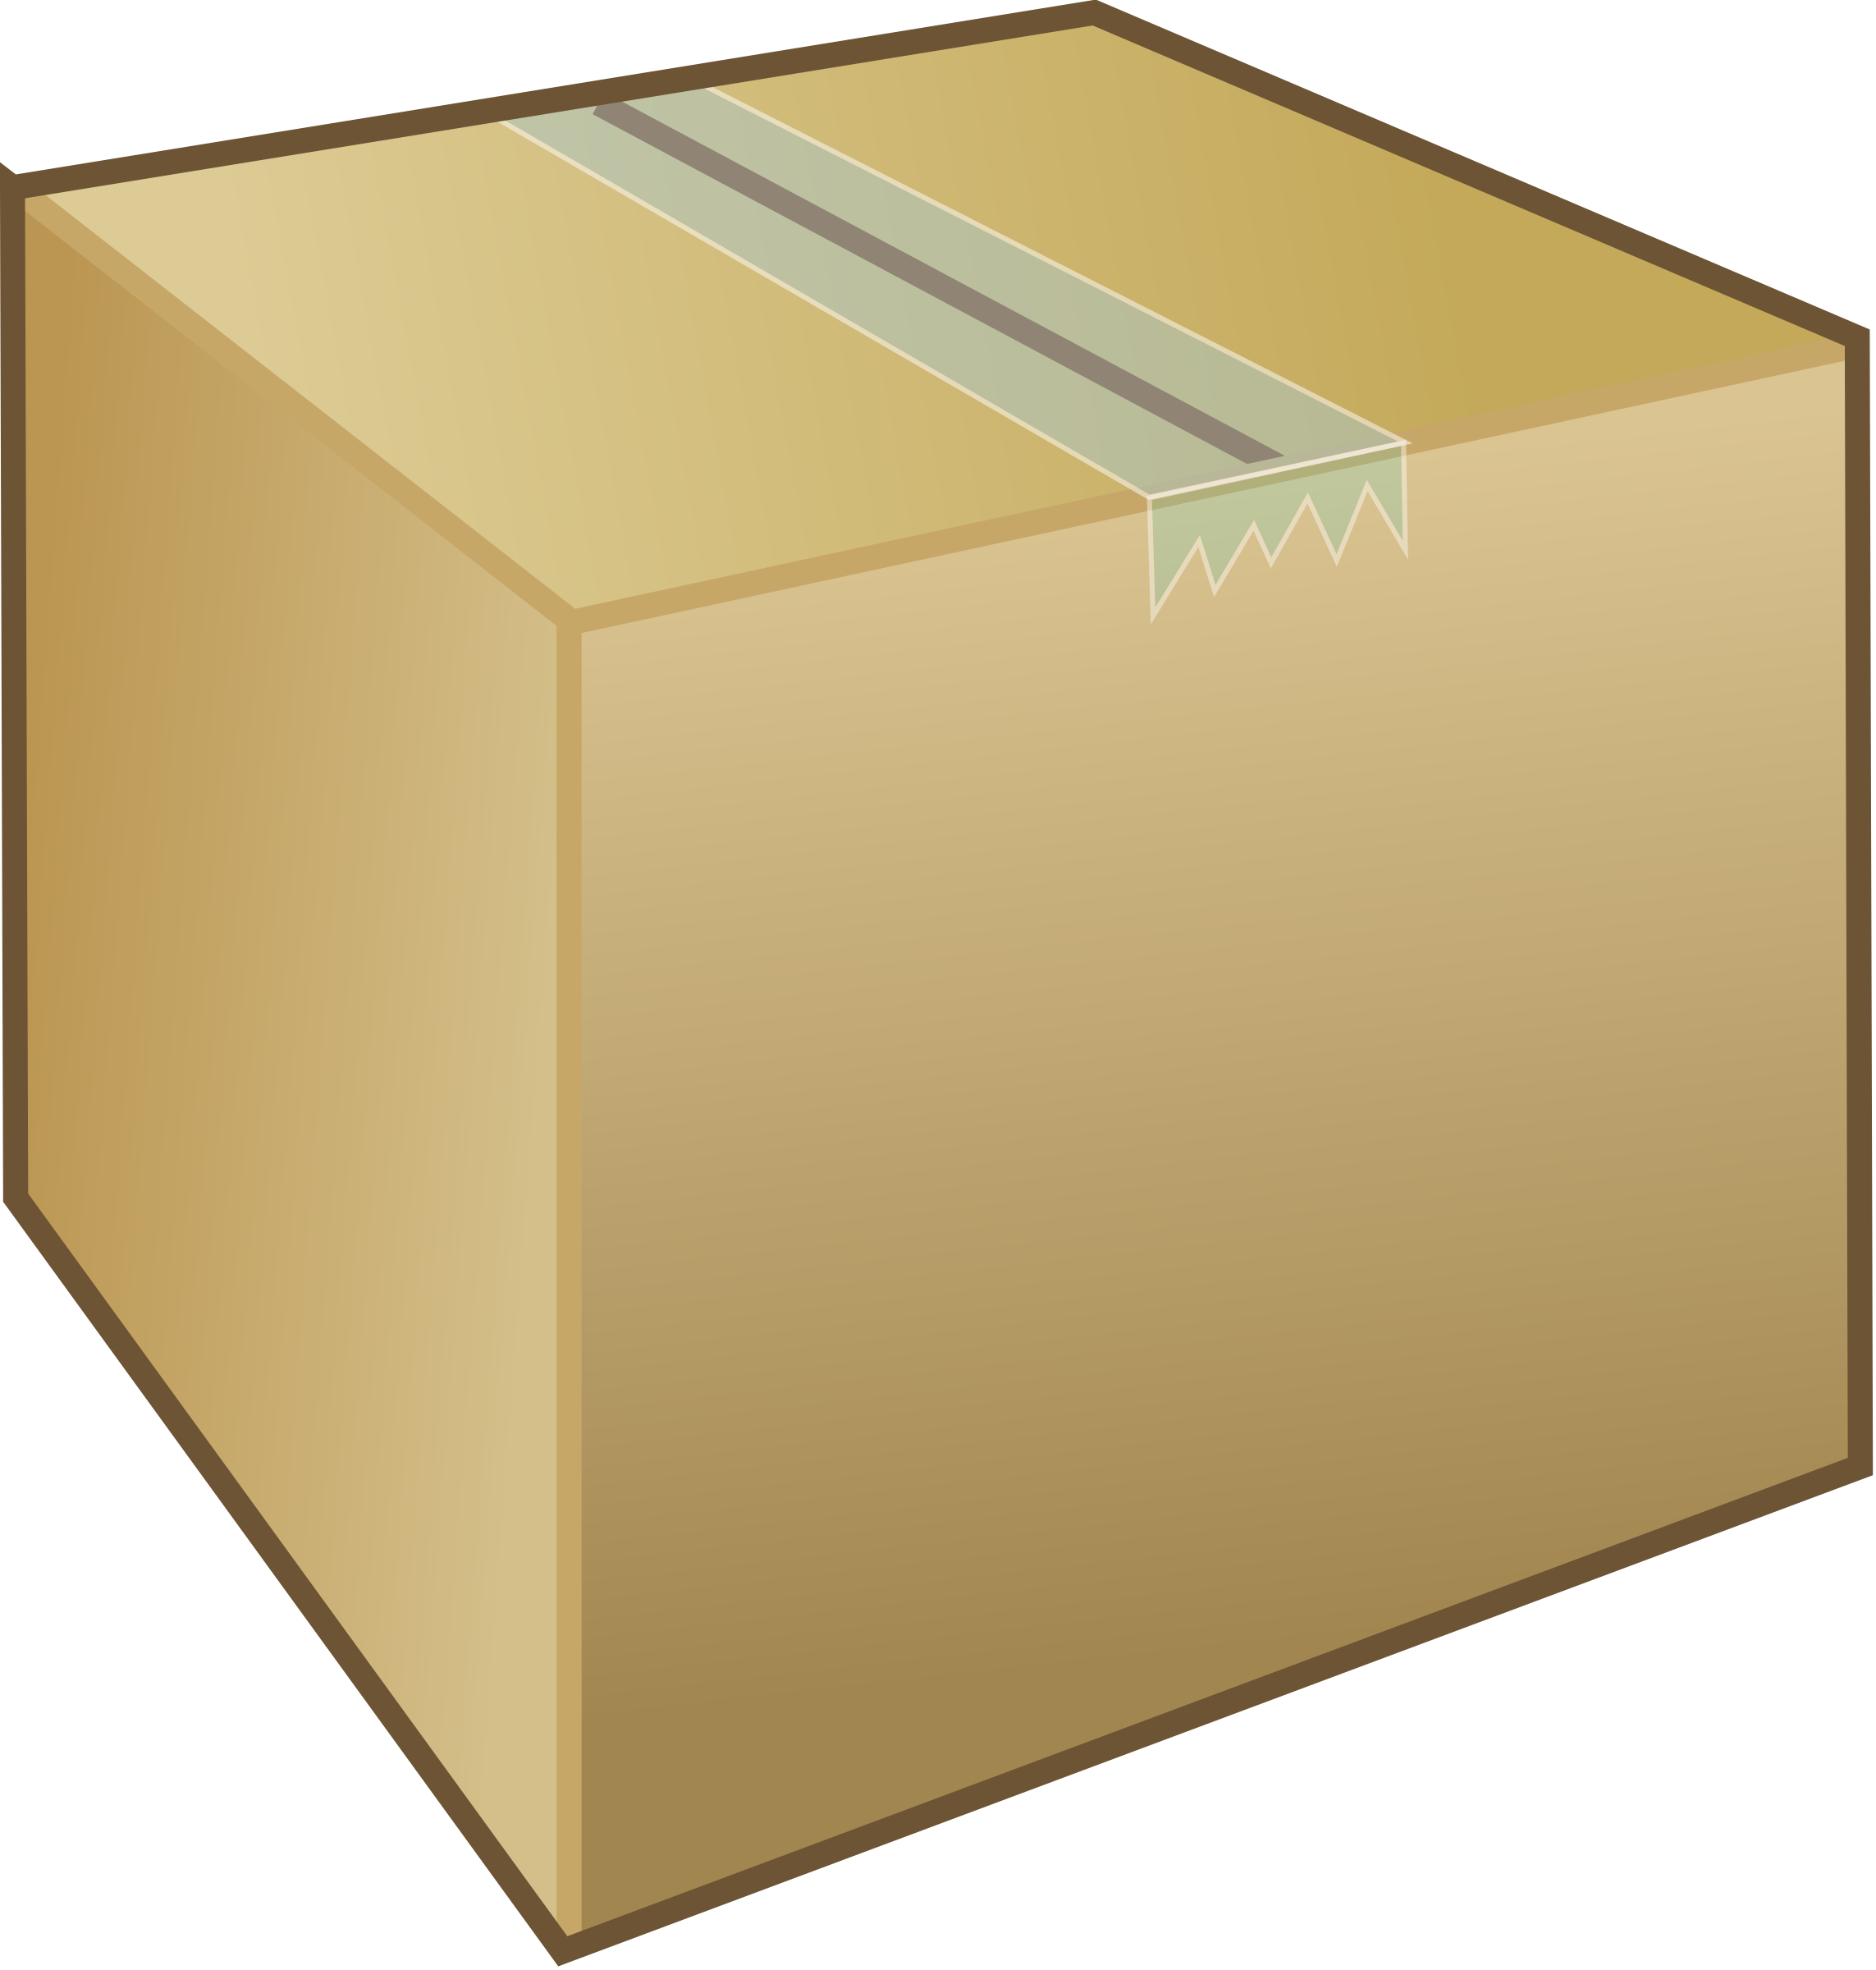 Clipart - Cardboard box / | Clipart Panda - Free Clipart Images